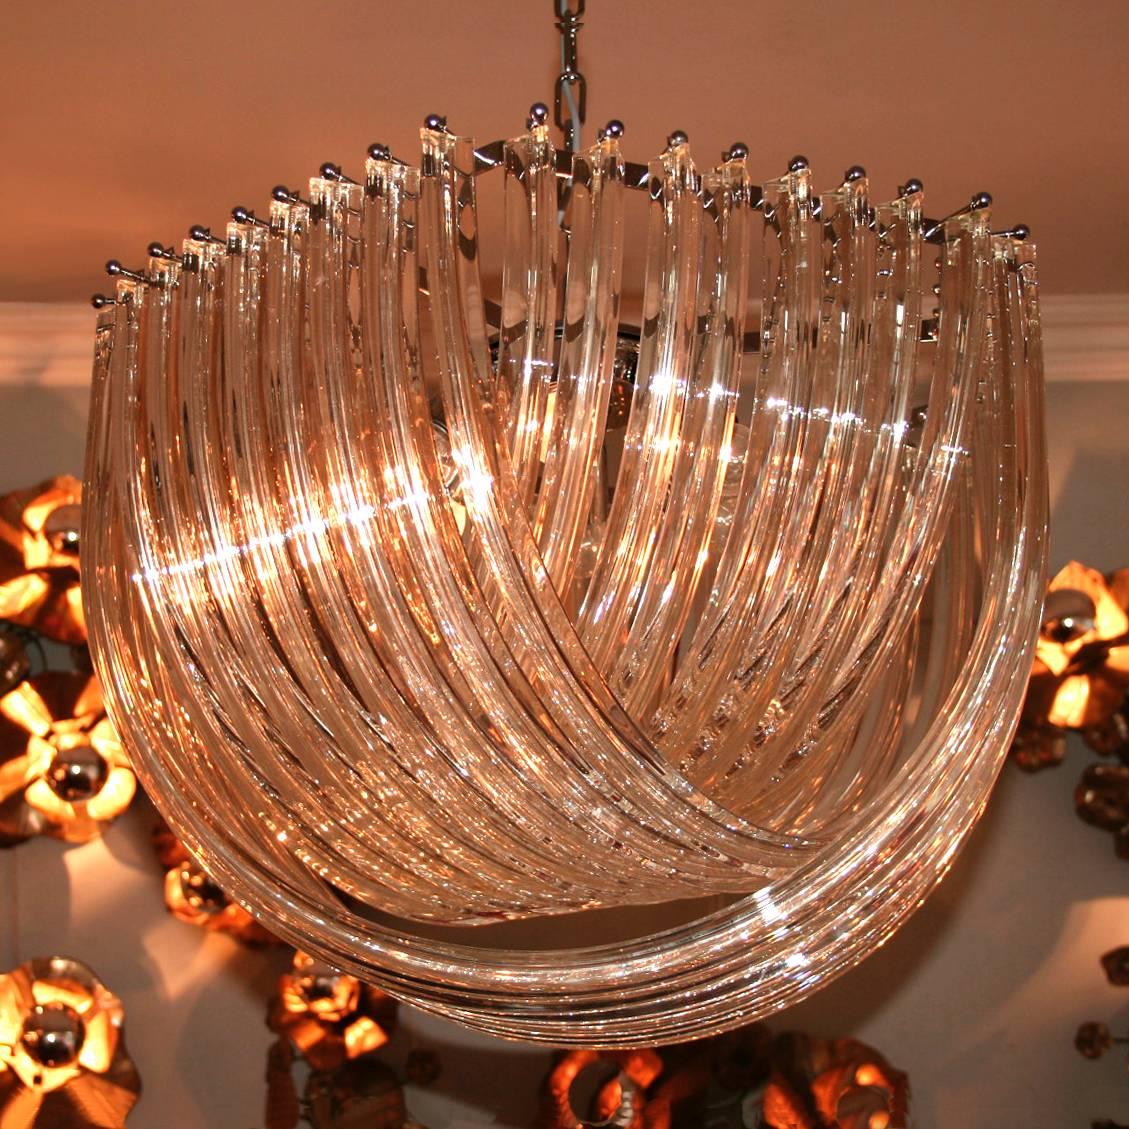 Elegant contemporary chandelier with interlaced, curved, crystal drops.
Available with a chrome or 'gold' frame and fittings.

Small: 50cm diam x 32cm drop: £3,000.
Medium: 60cm diam. x 42cm drop: £3,850.
Large: 85cm diam. x 55cm drop: £5,400.